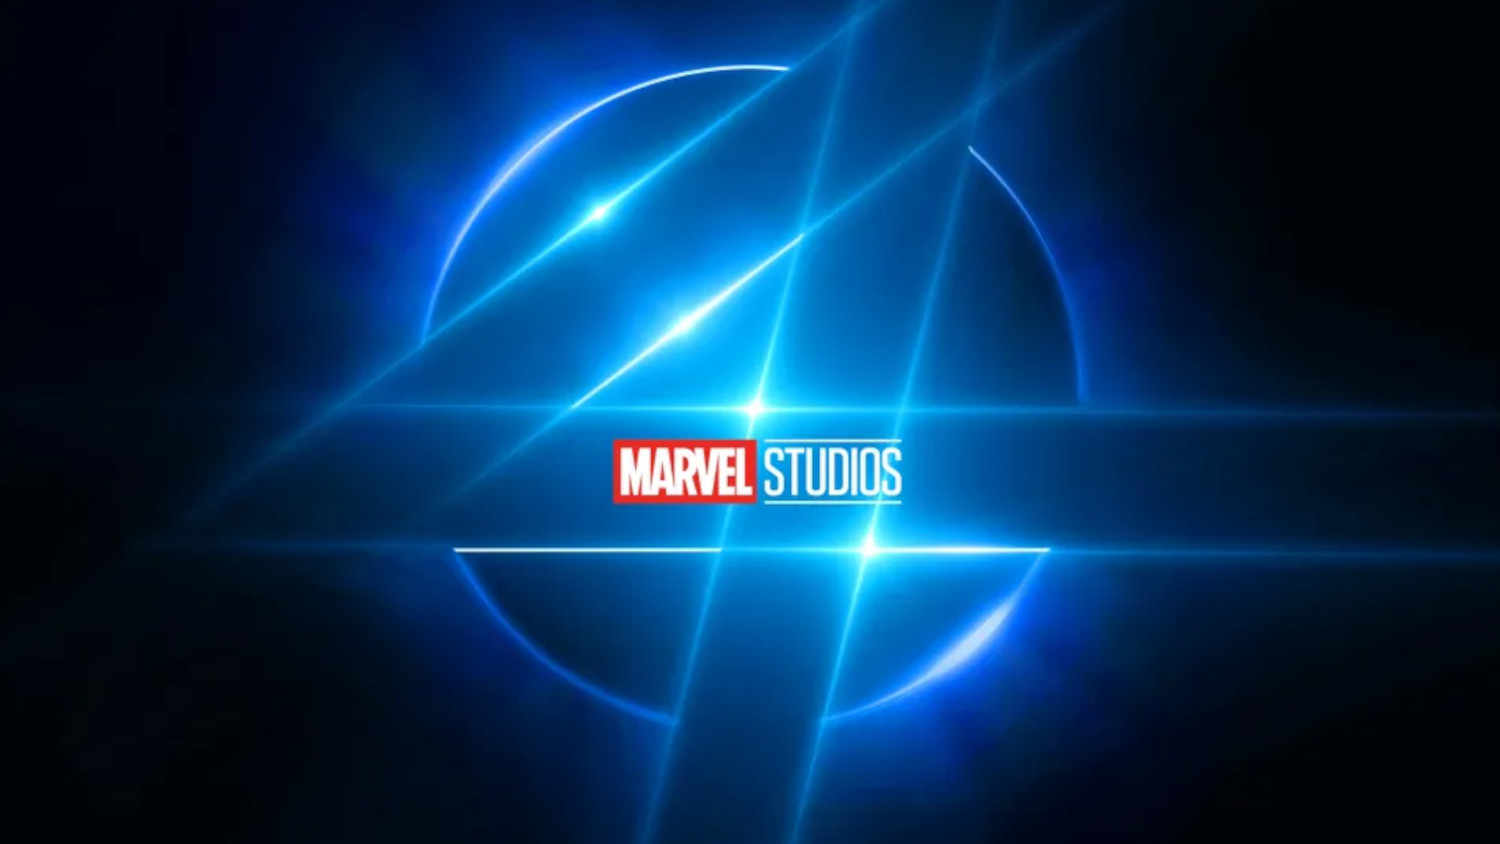 Marvel Studios’ Comic-Con Confirmed For Saturday: Kevin Feige Attending Comics Panel